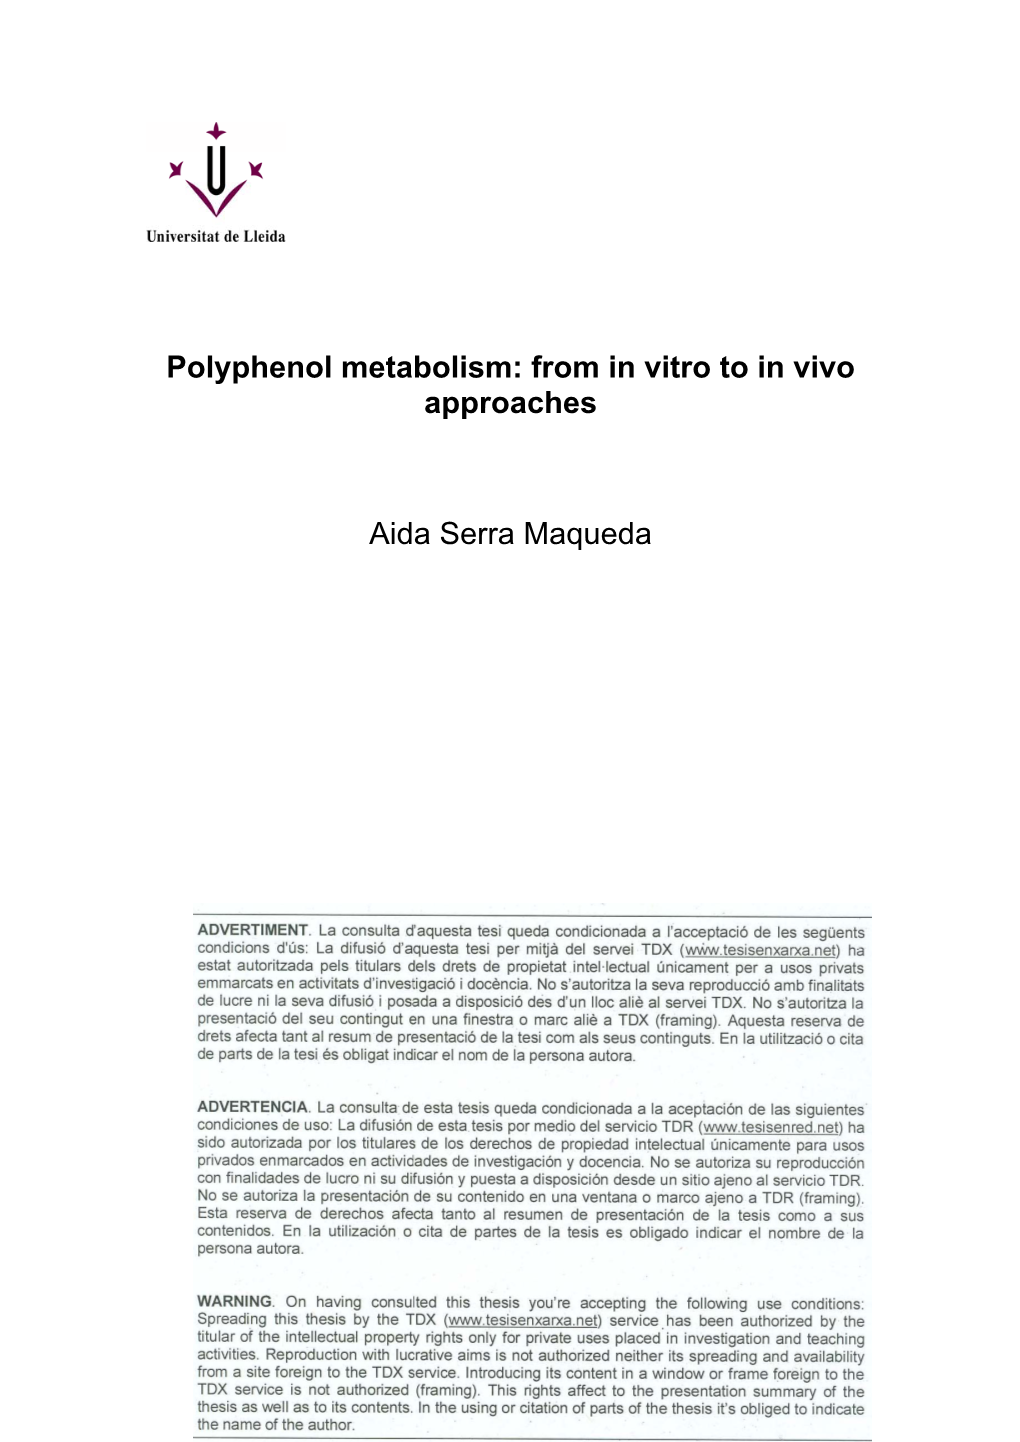 Polyphenol Metabolism: from in Vitro to in Vivo Approaches